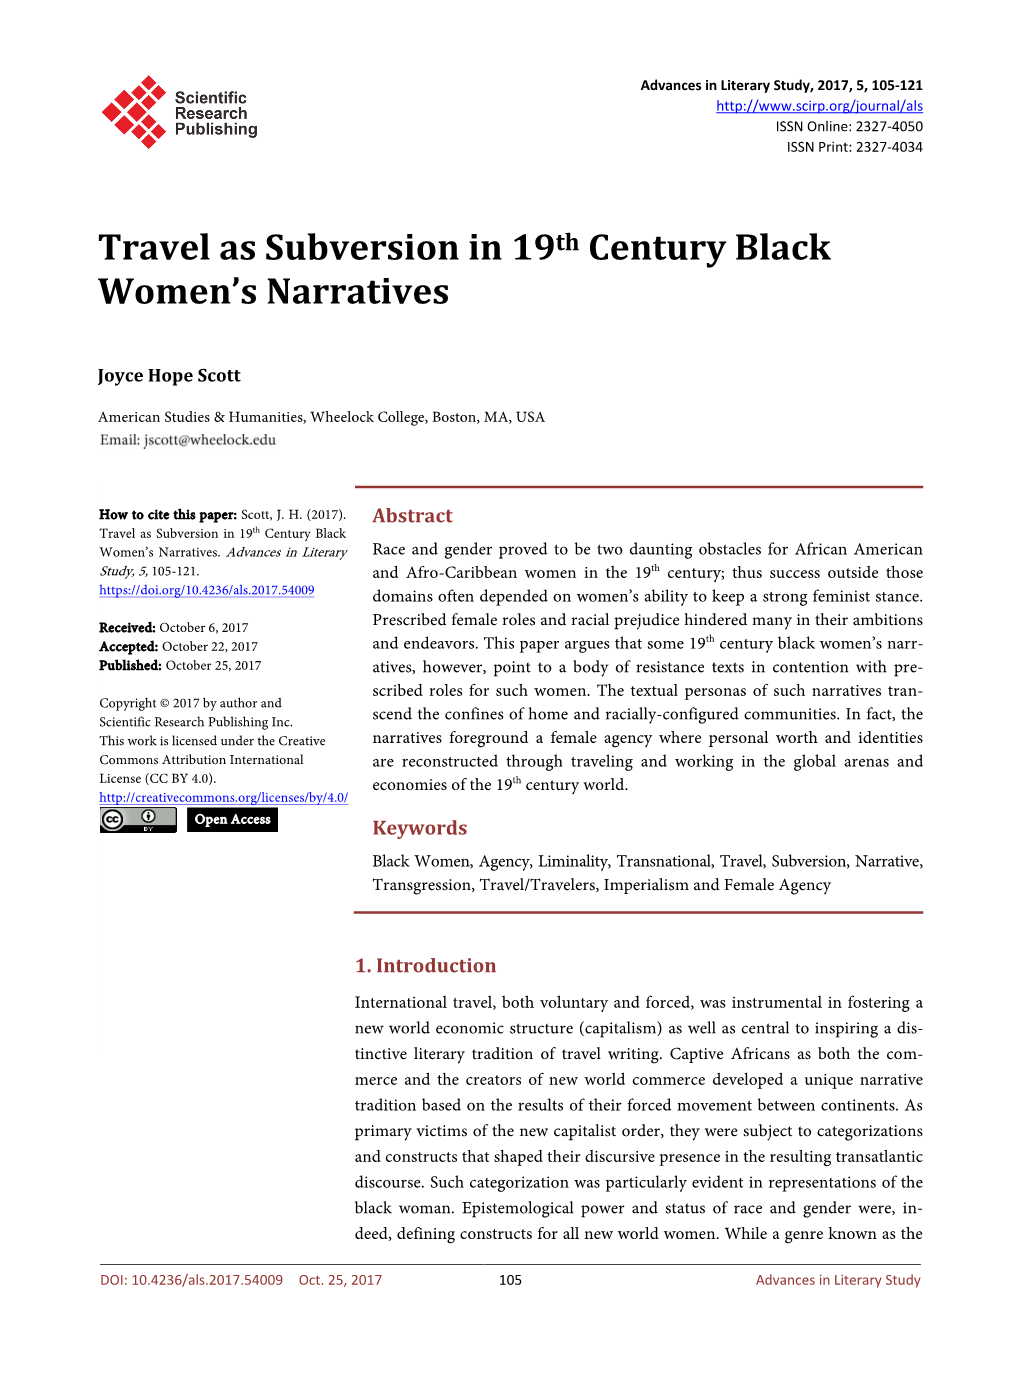 Travel As Subversion in 19Th Century Black Women's Narratives